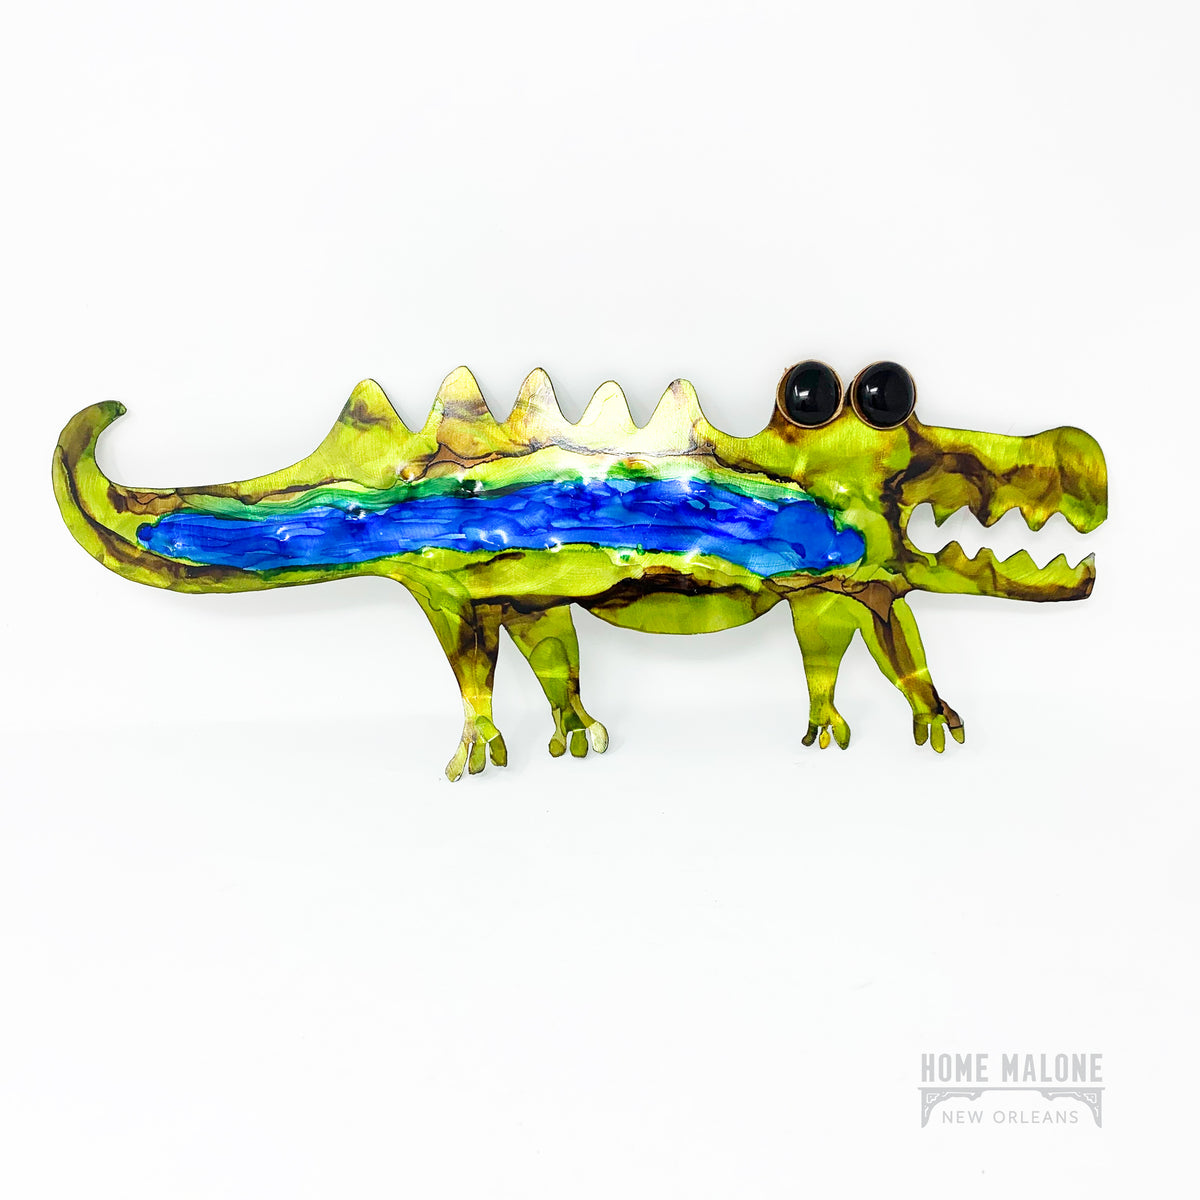 Walking Gator Metal Art: New Orleans Art and Gifts at Home Malone